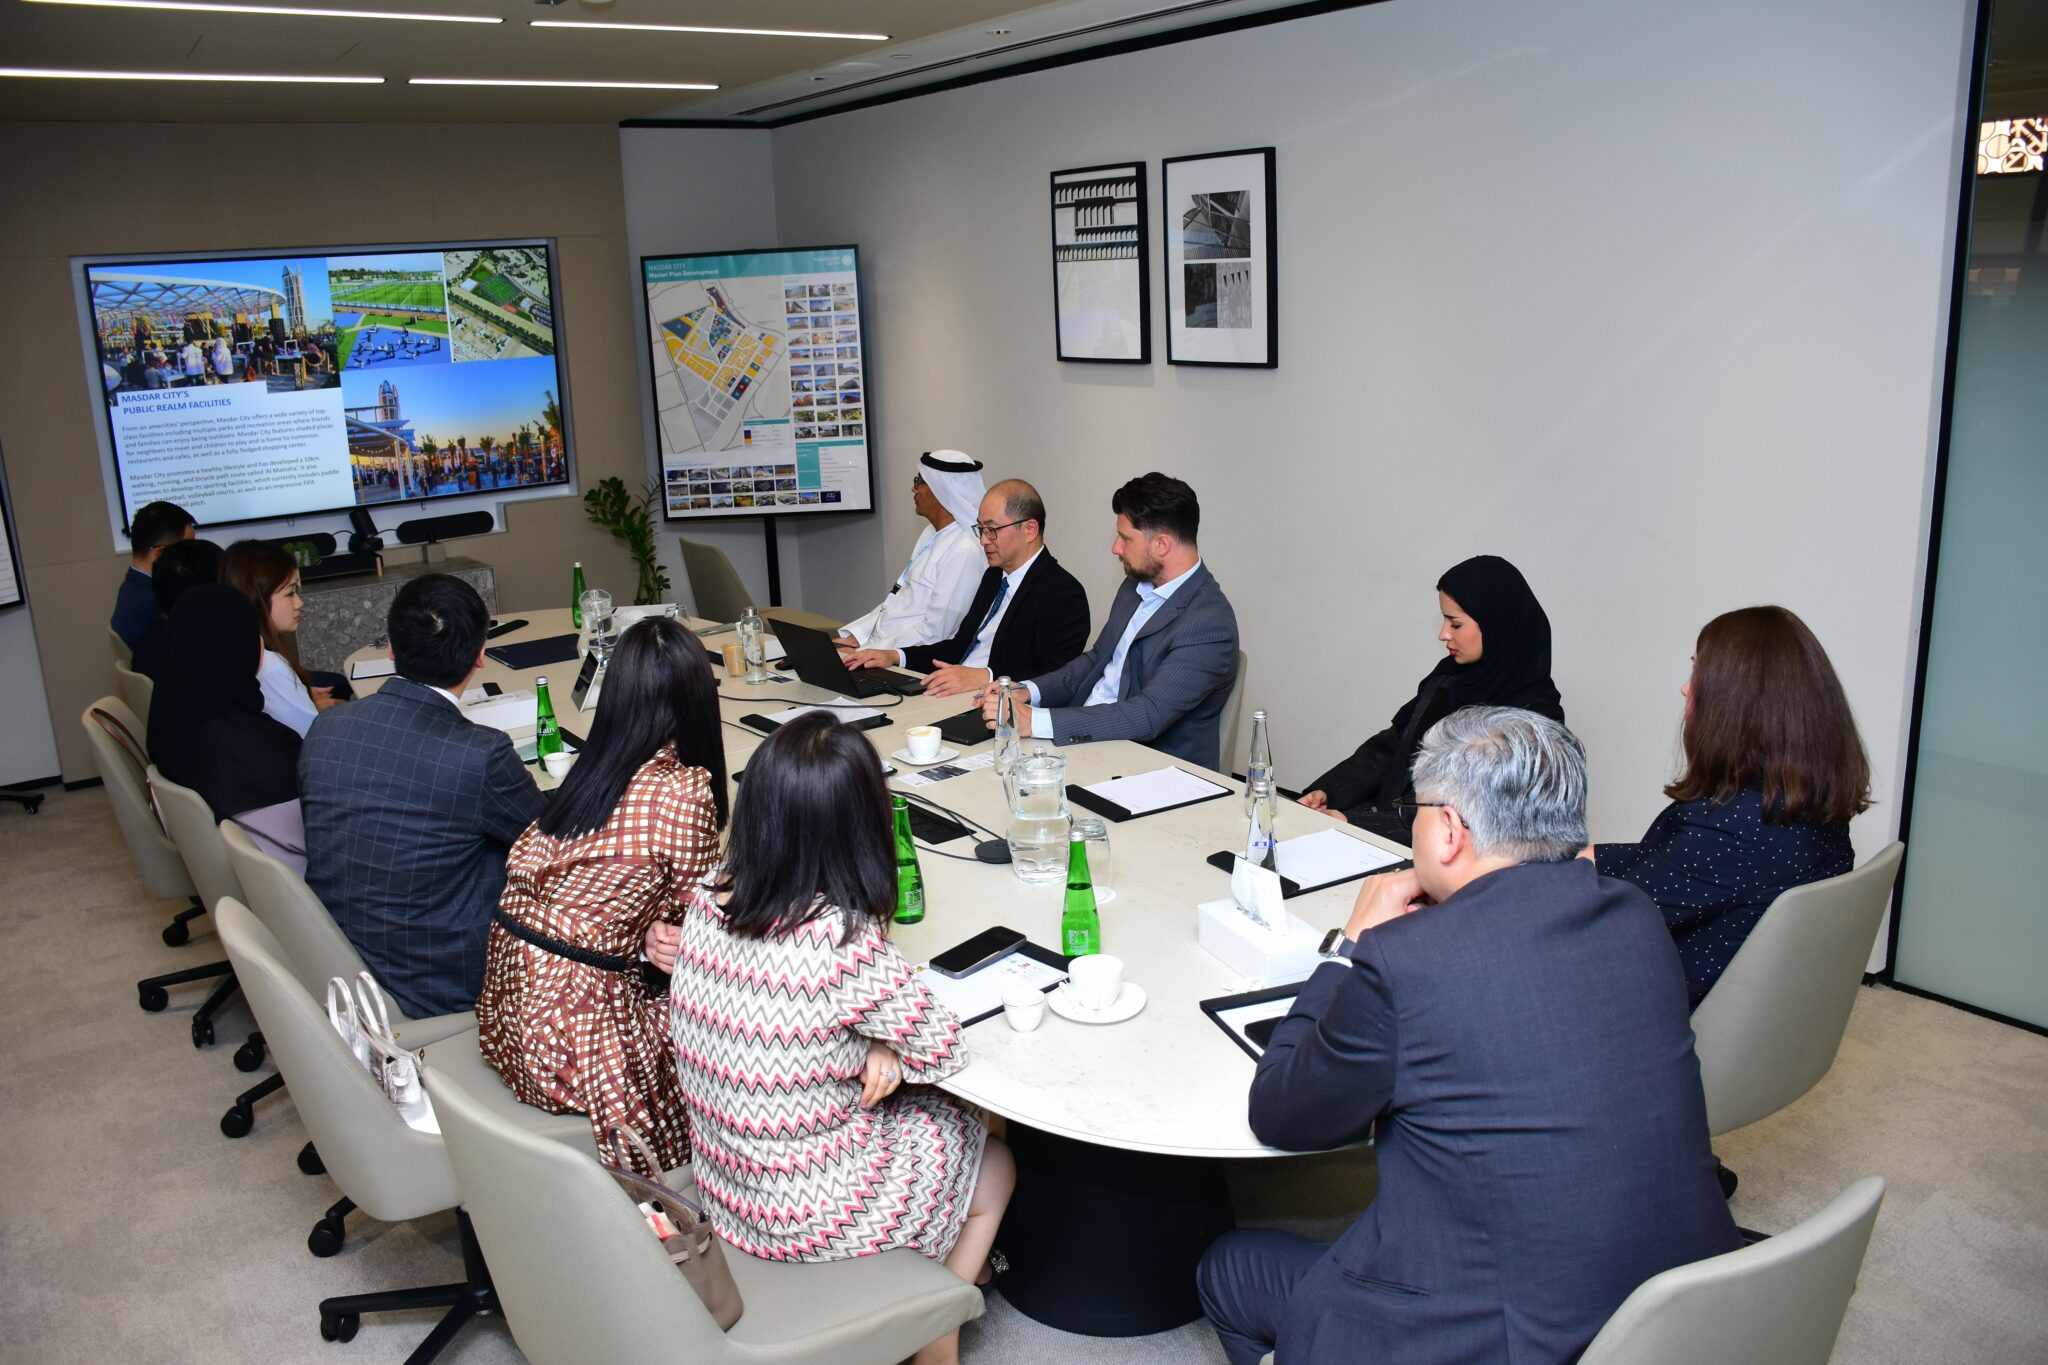 Meeting at Masdar City to discuss the path forward for UAE's sustainable initiatives